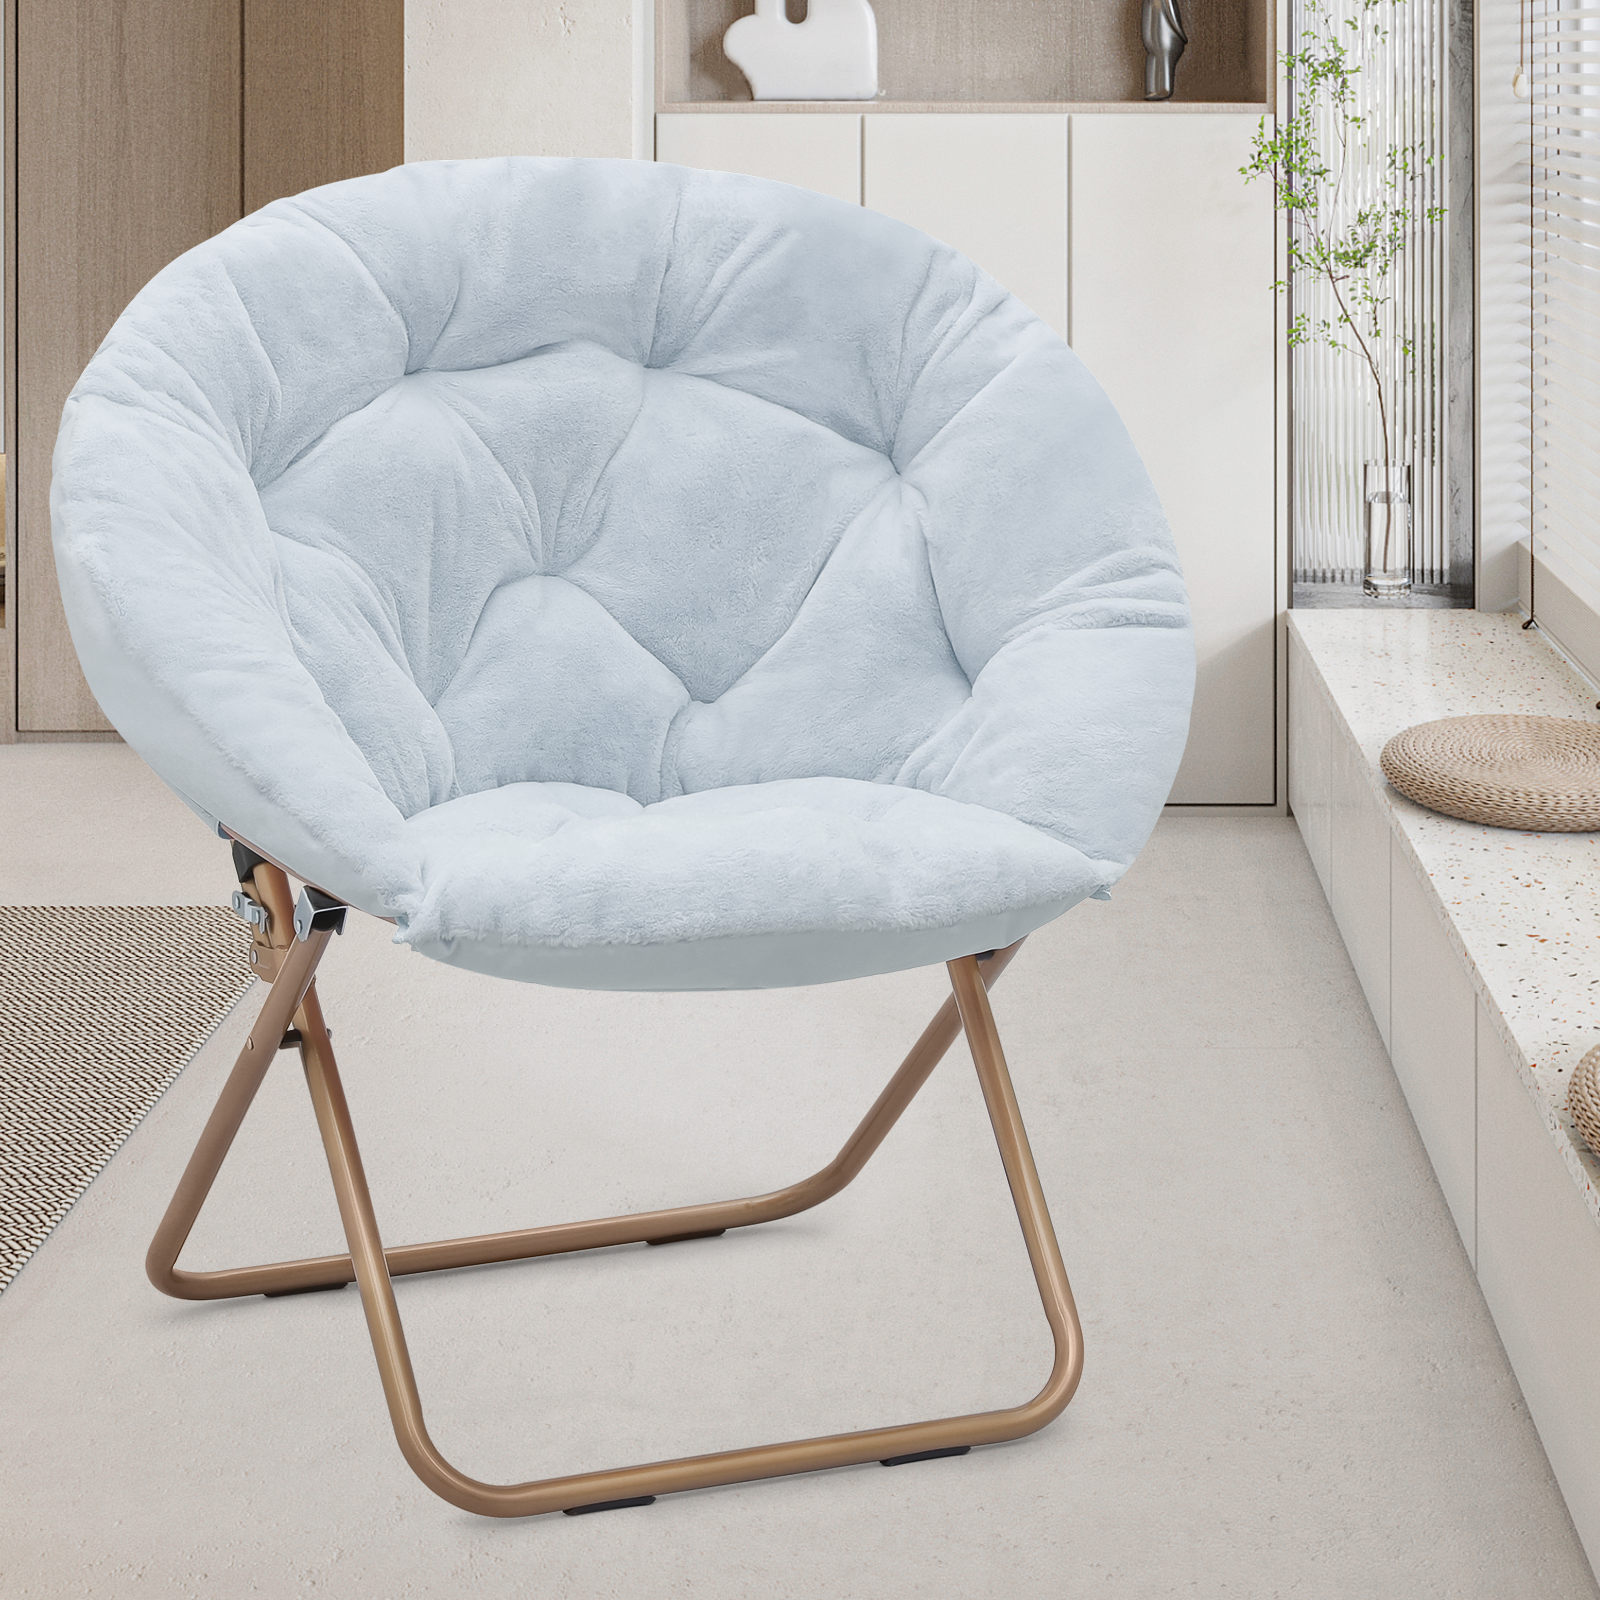 Magshion Folding Saucer Chair with Faux Fur Upholstery, Lounge Cozy Chair Moon Chair with Gold Metal Frame for Dorm Bedroom Living Room, Blue - image 3 of 10